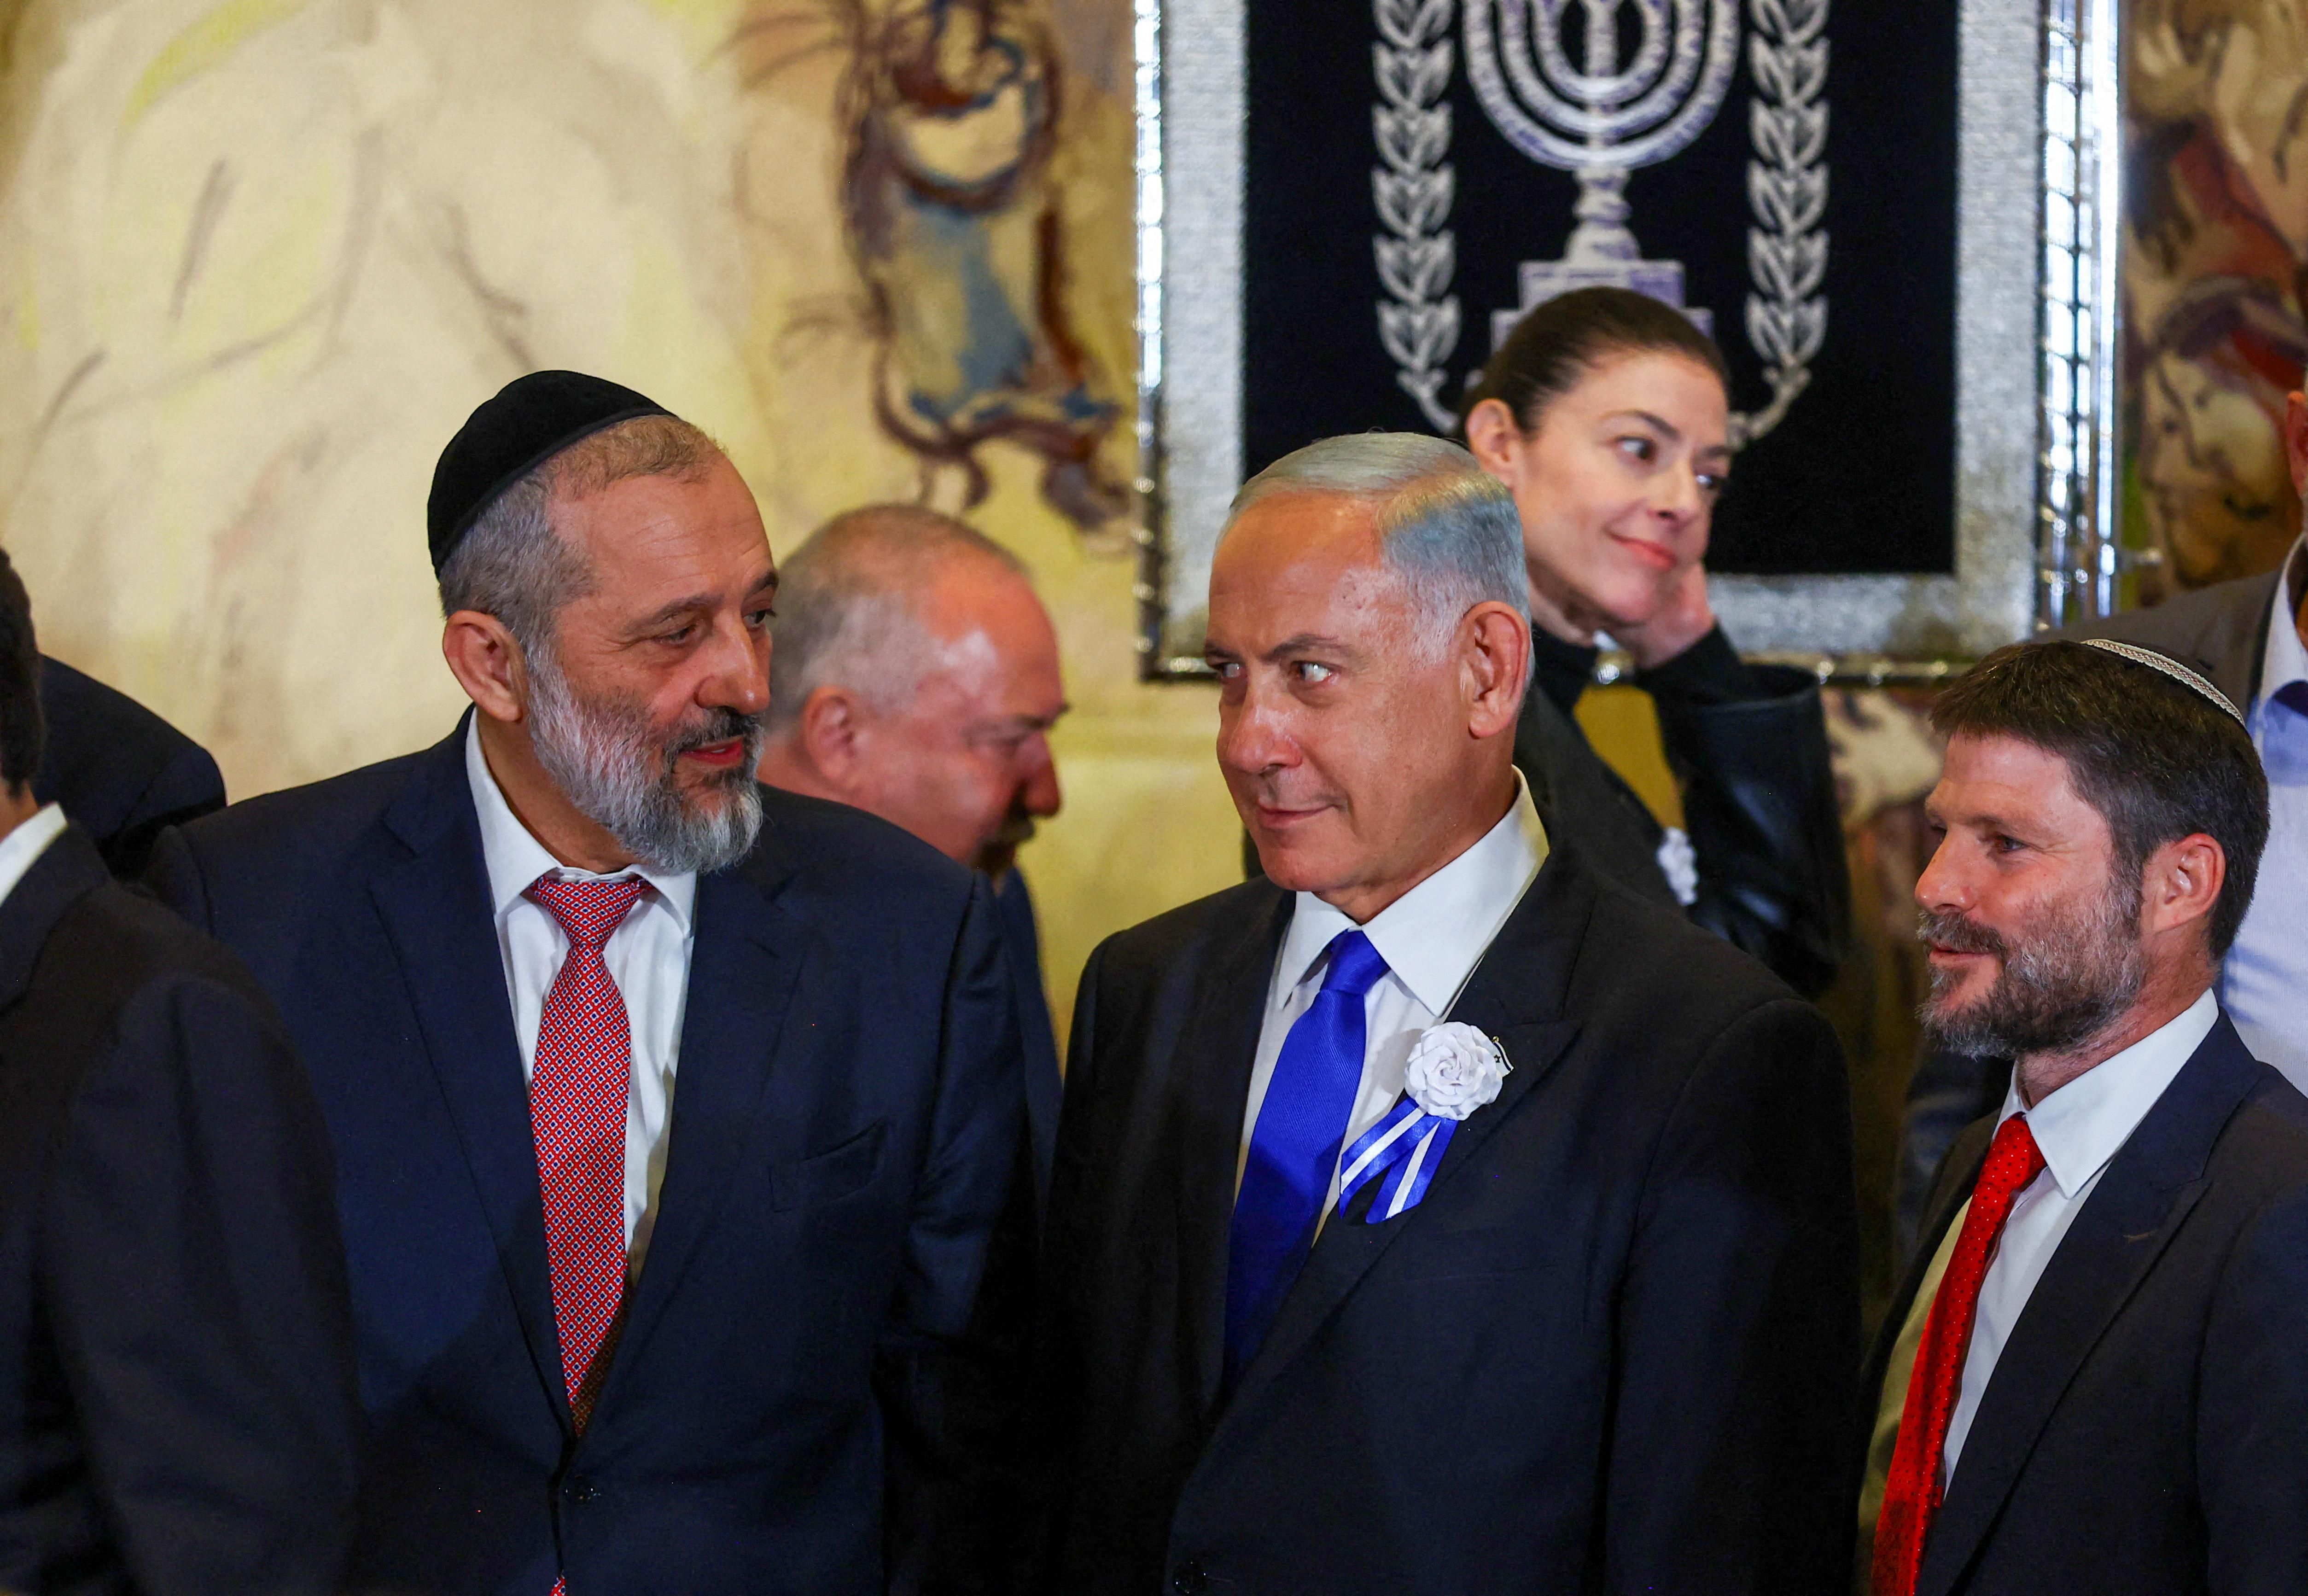 Israel's PM Benjamin Netanyahu with other members of the new Israeli parliament after their swearing-in ceremony in Jerusalem.